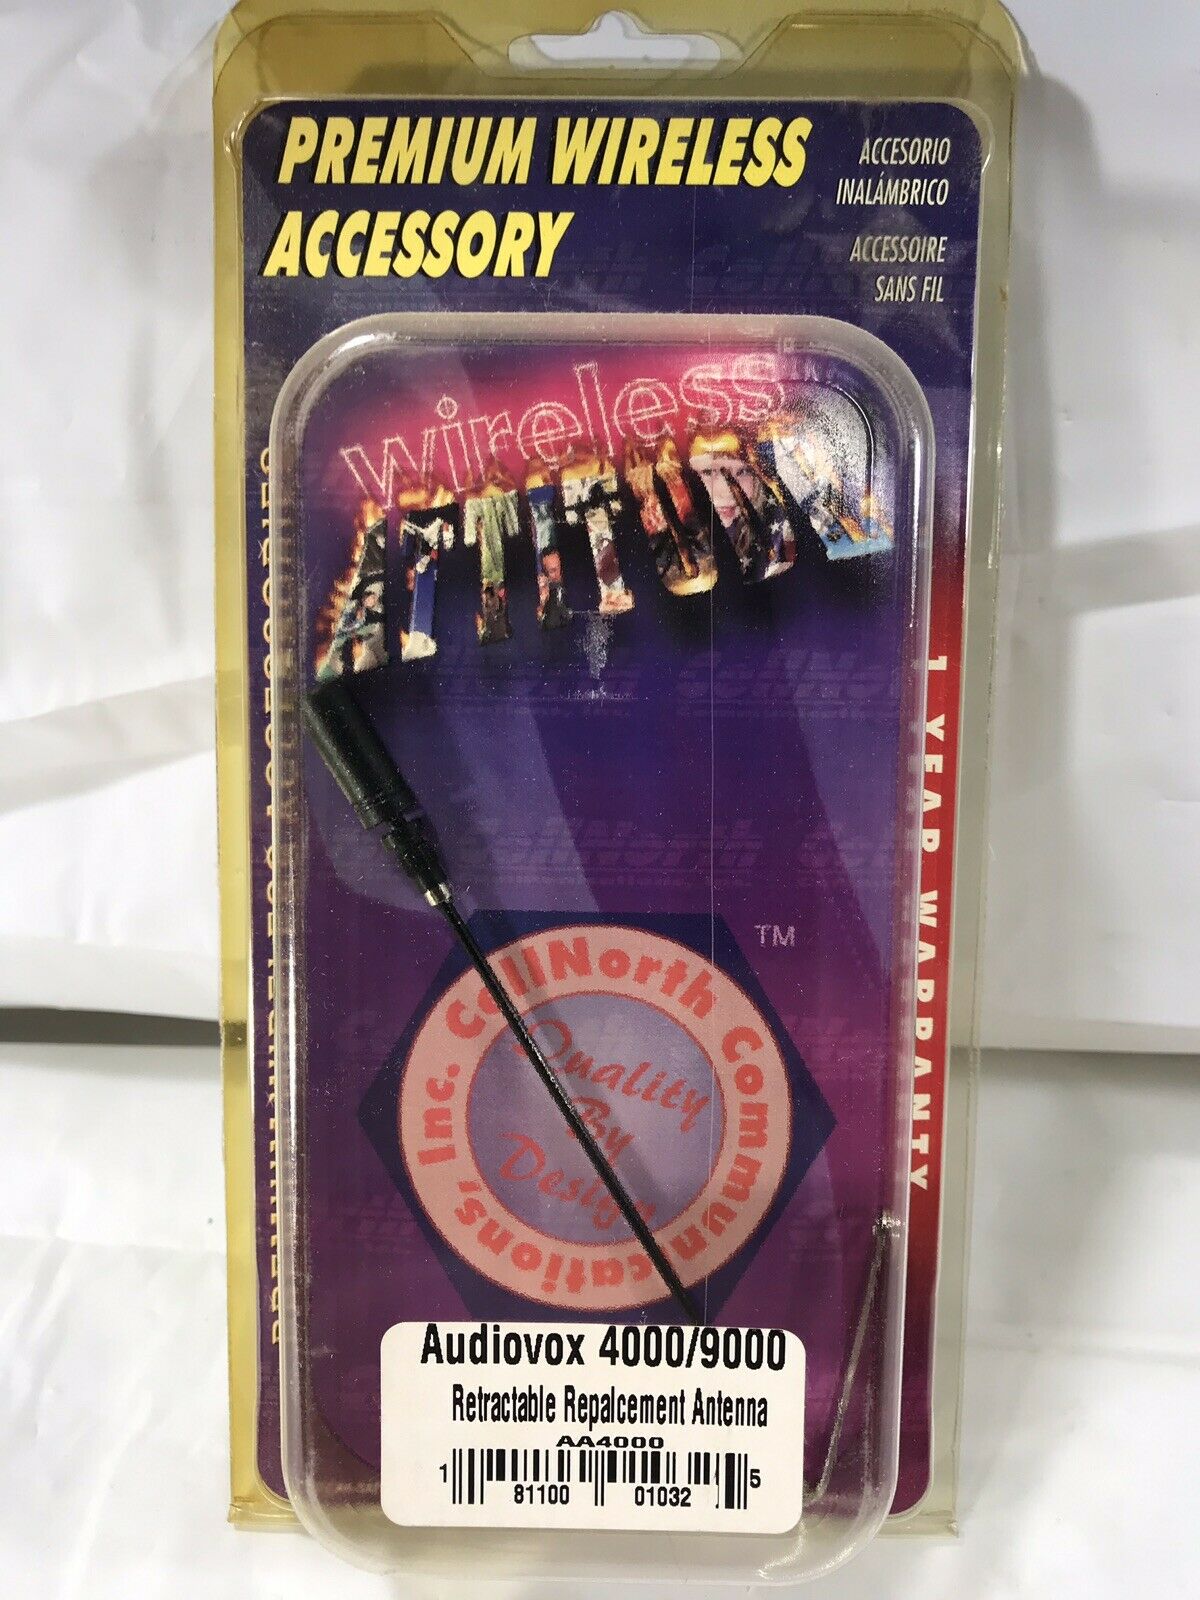 Vintage Audiovox 4000 9000 Retractable Replacement Antenna Cellnorth Nos Aa4000